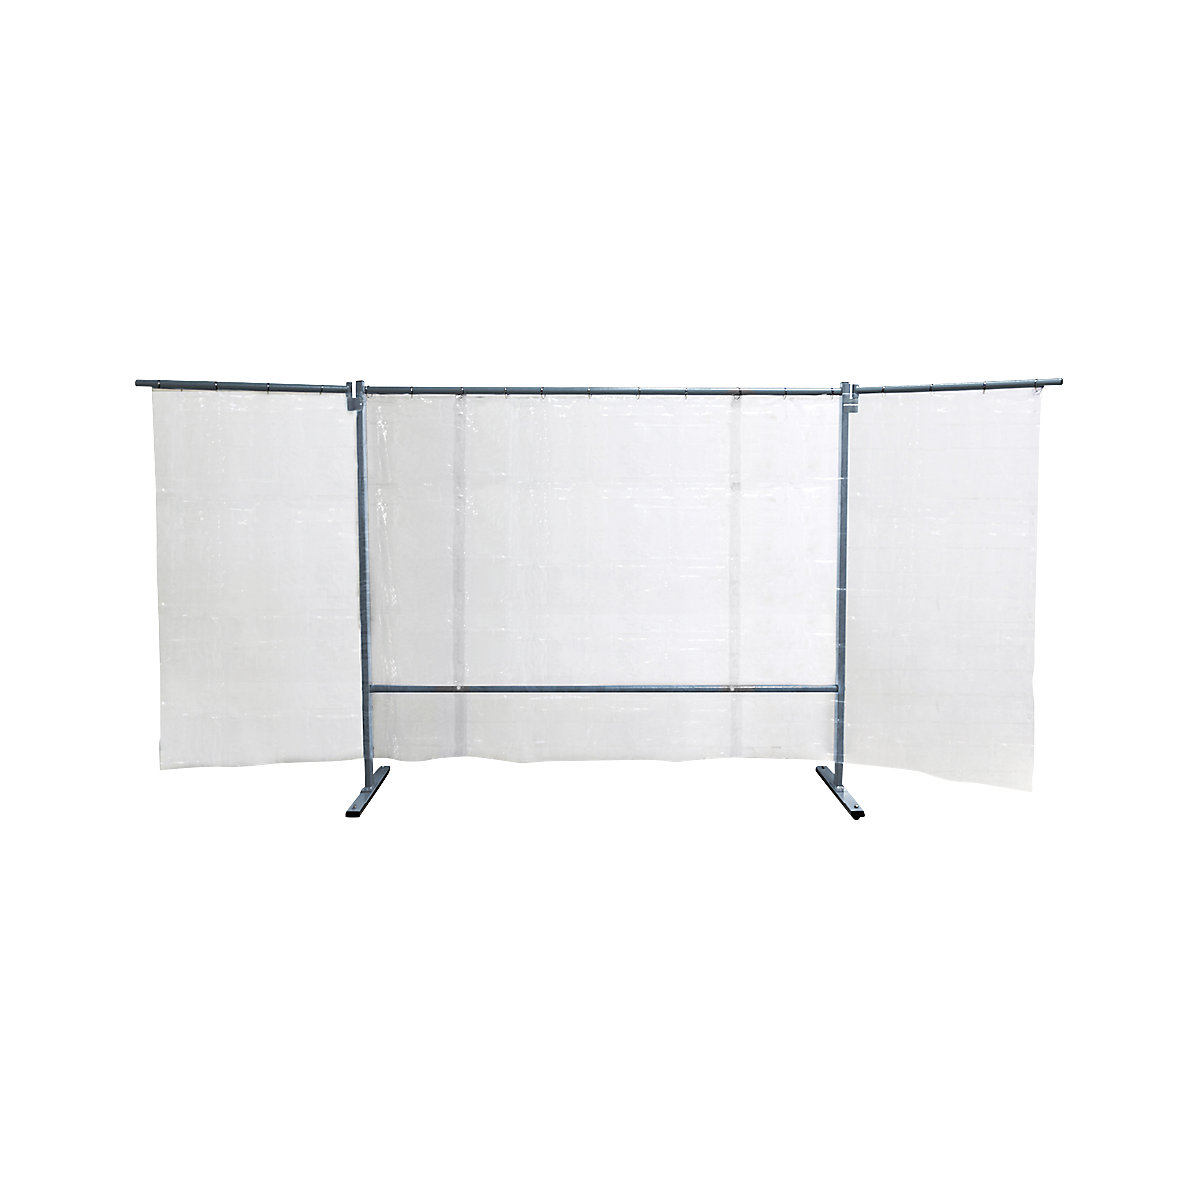 Mobile welding protection screen, 3-part model, HxW 1930 x 3800 mm, with welding protection film, transparent